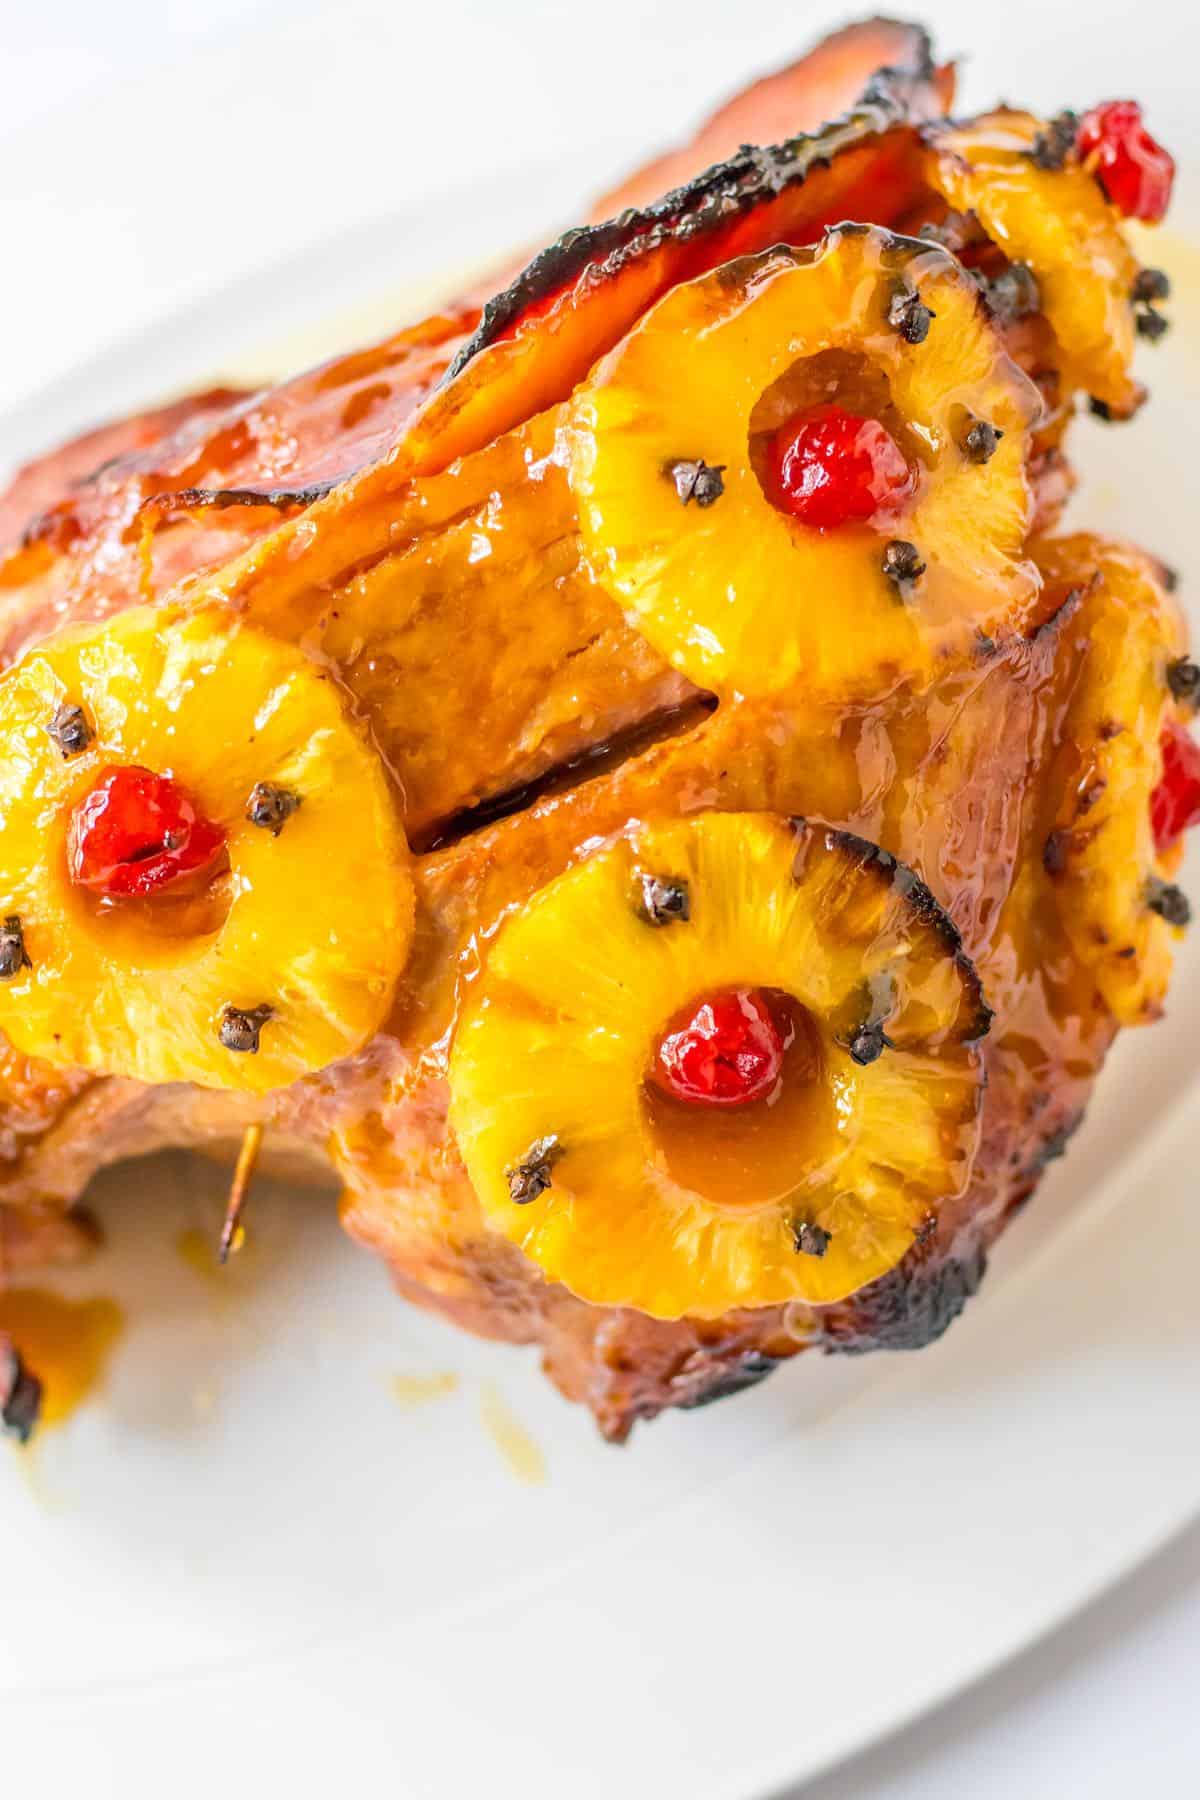 Cooked spiral ham with pineapple and cherries.